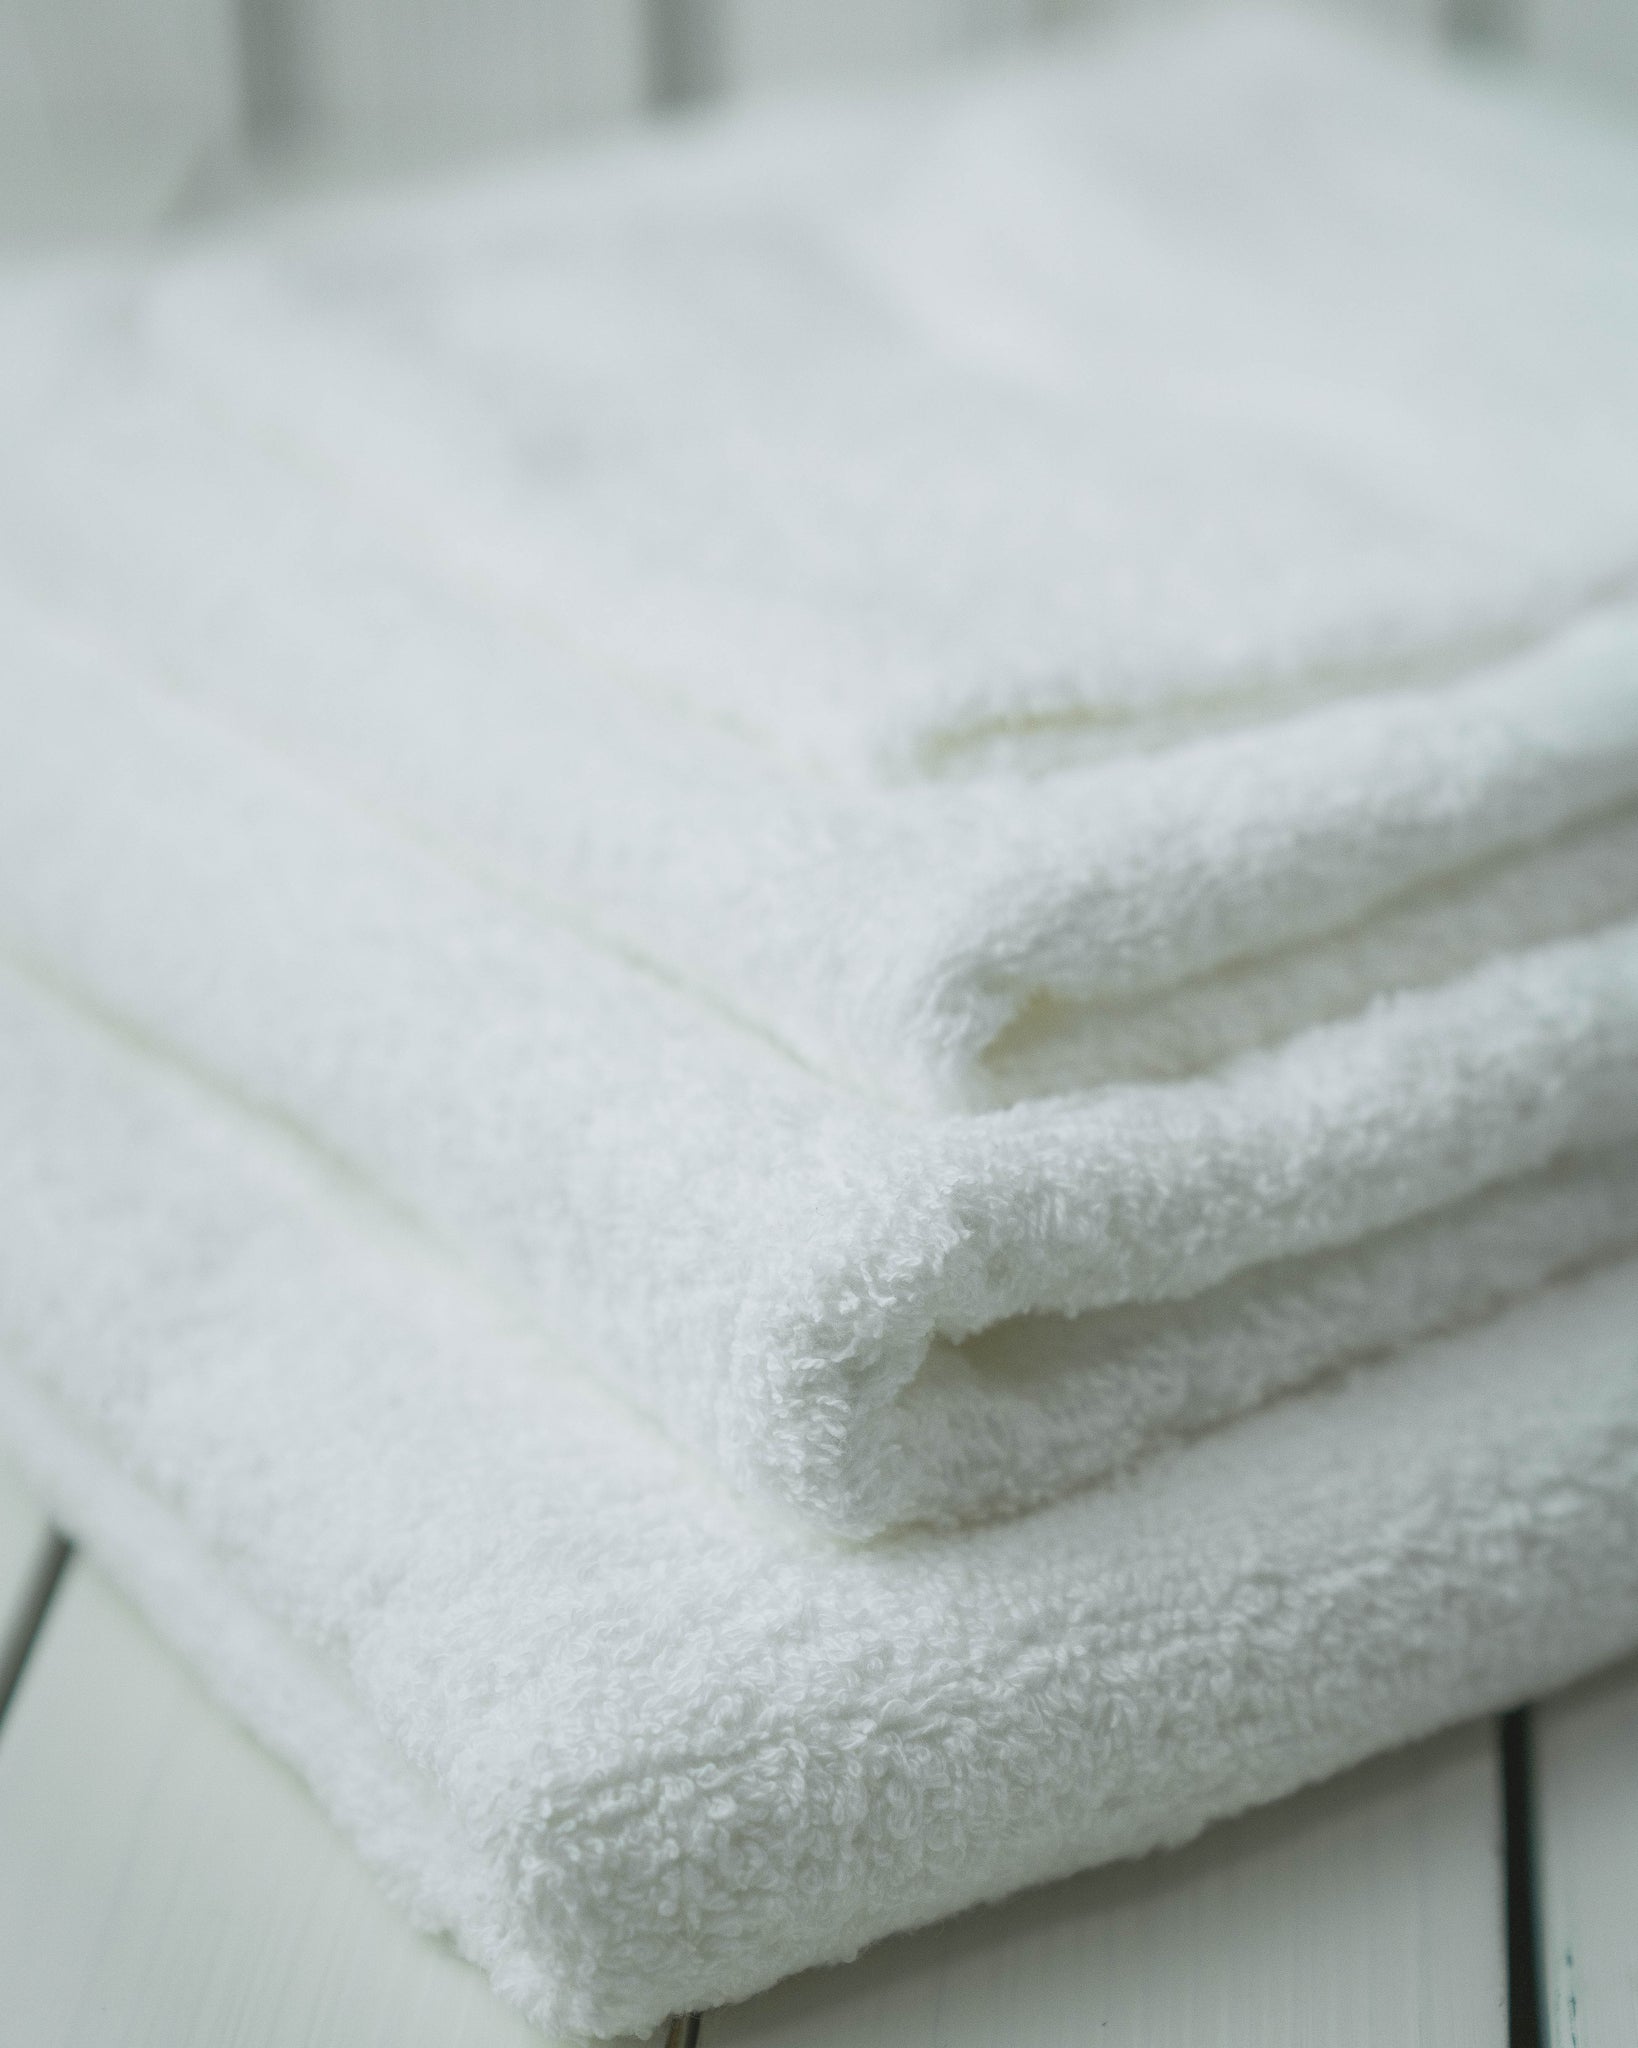 Bulk Terry Cotton Bar Towels, 10 Pound Package